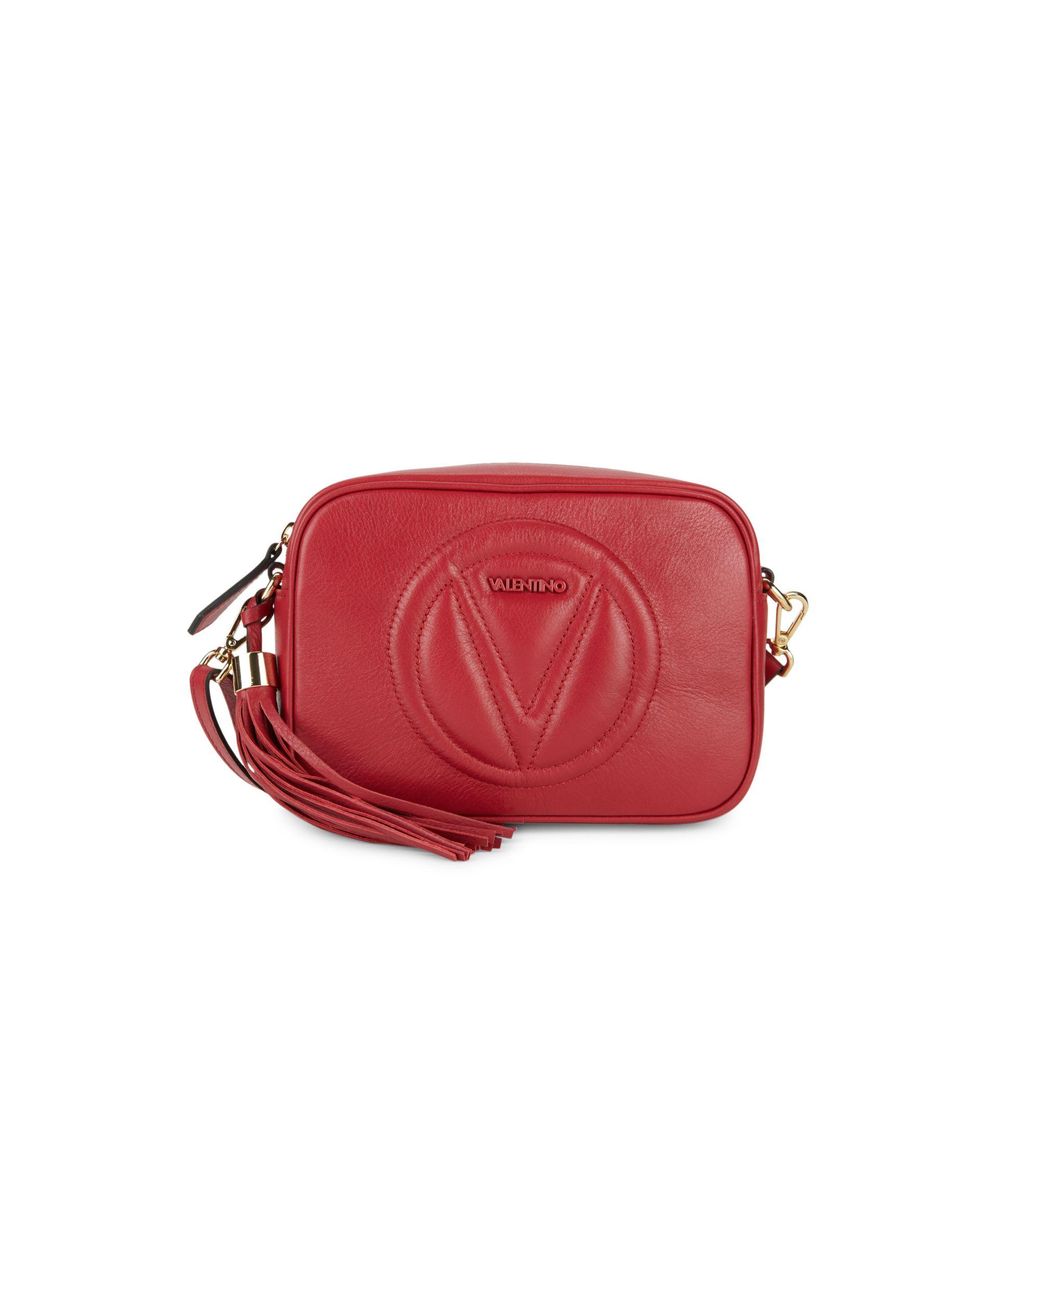 Valentino By Mario Valentino Leather Crossbody Bag in Red - Lyst